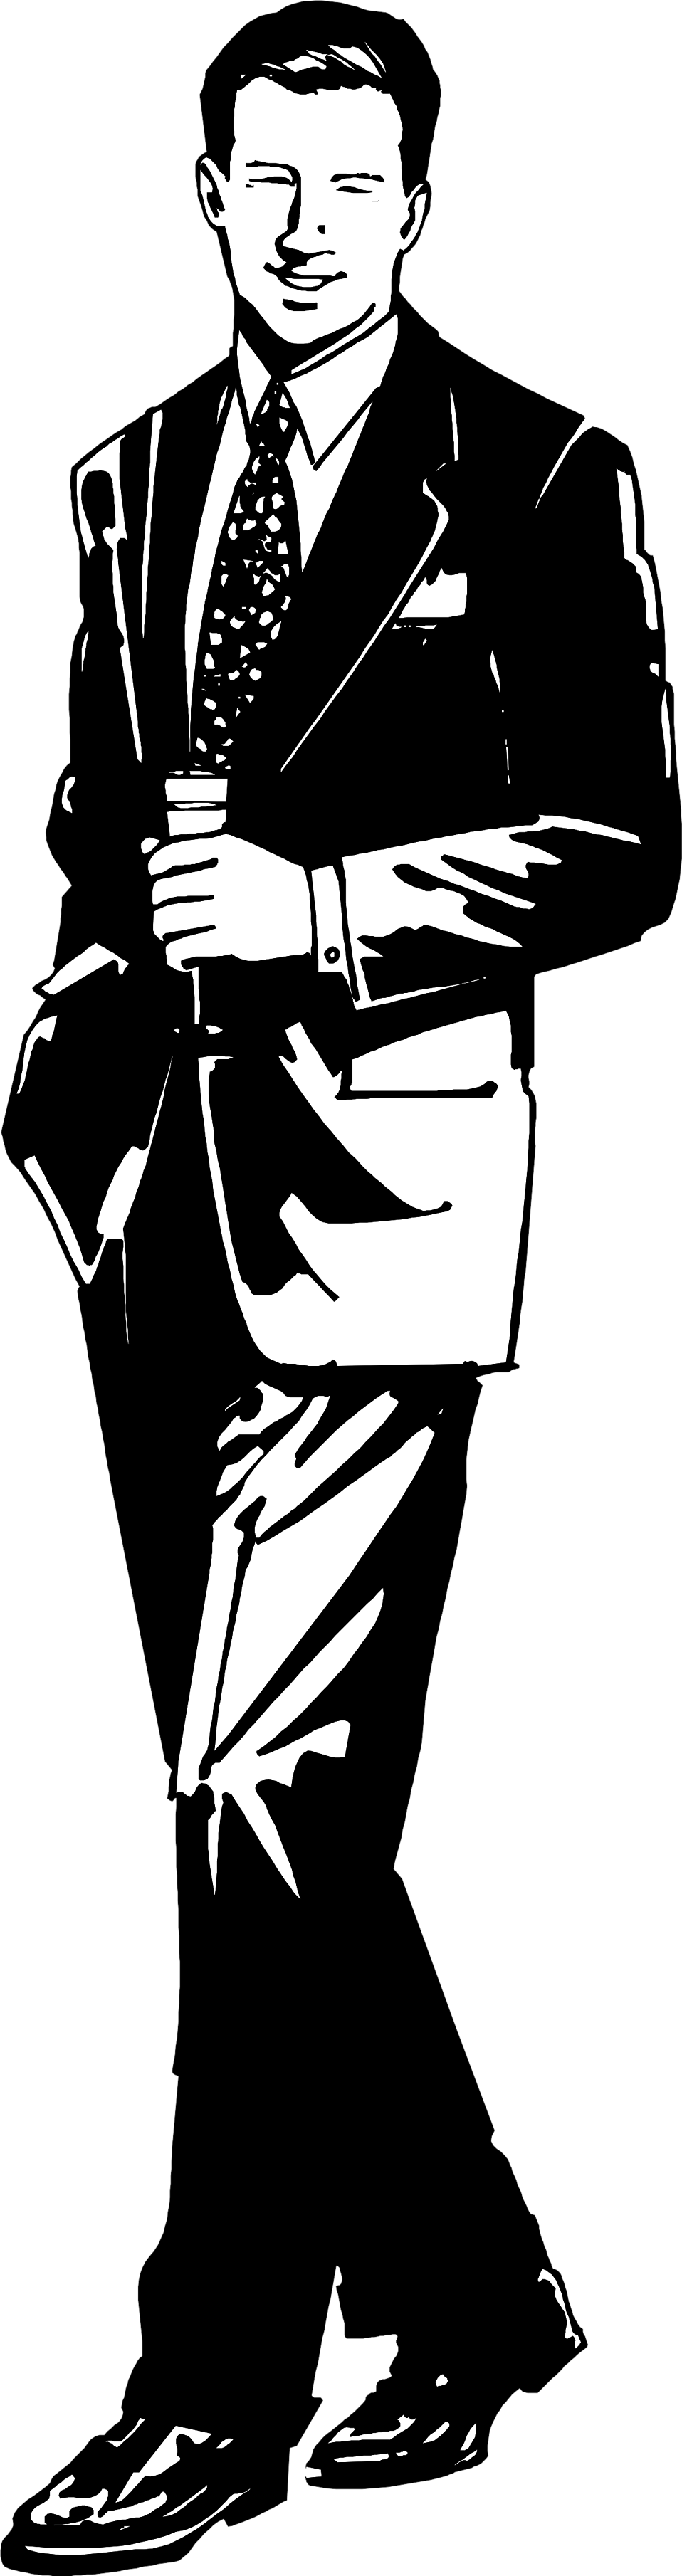 Formal Wear Illustration Suits - Man In Suit Clipart Png - Free Transparent  PNG Download - PNGkey